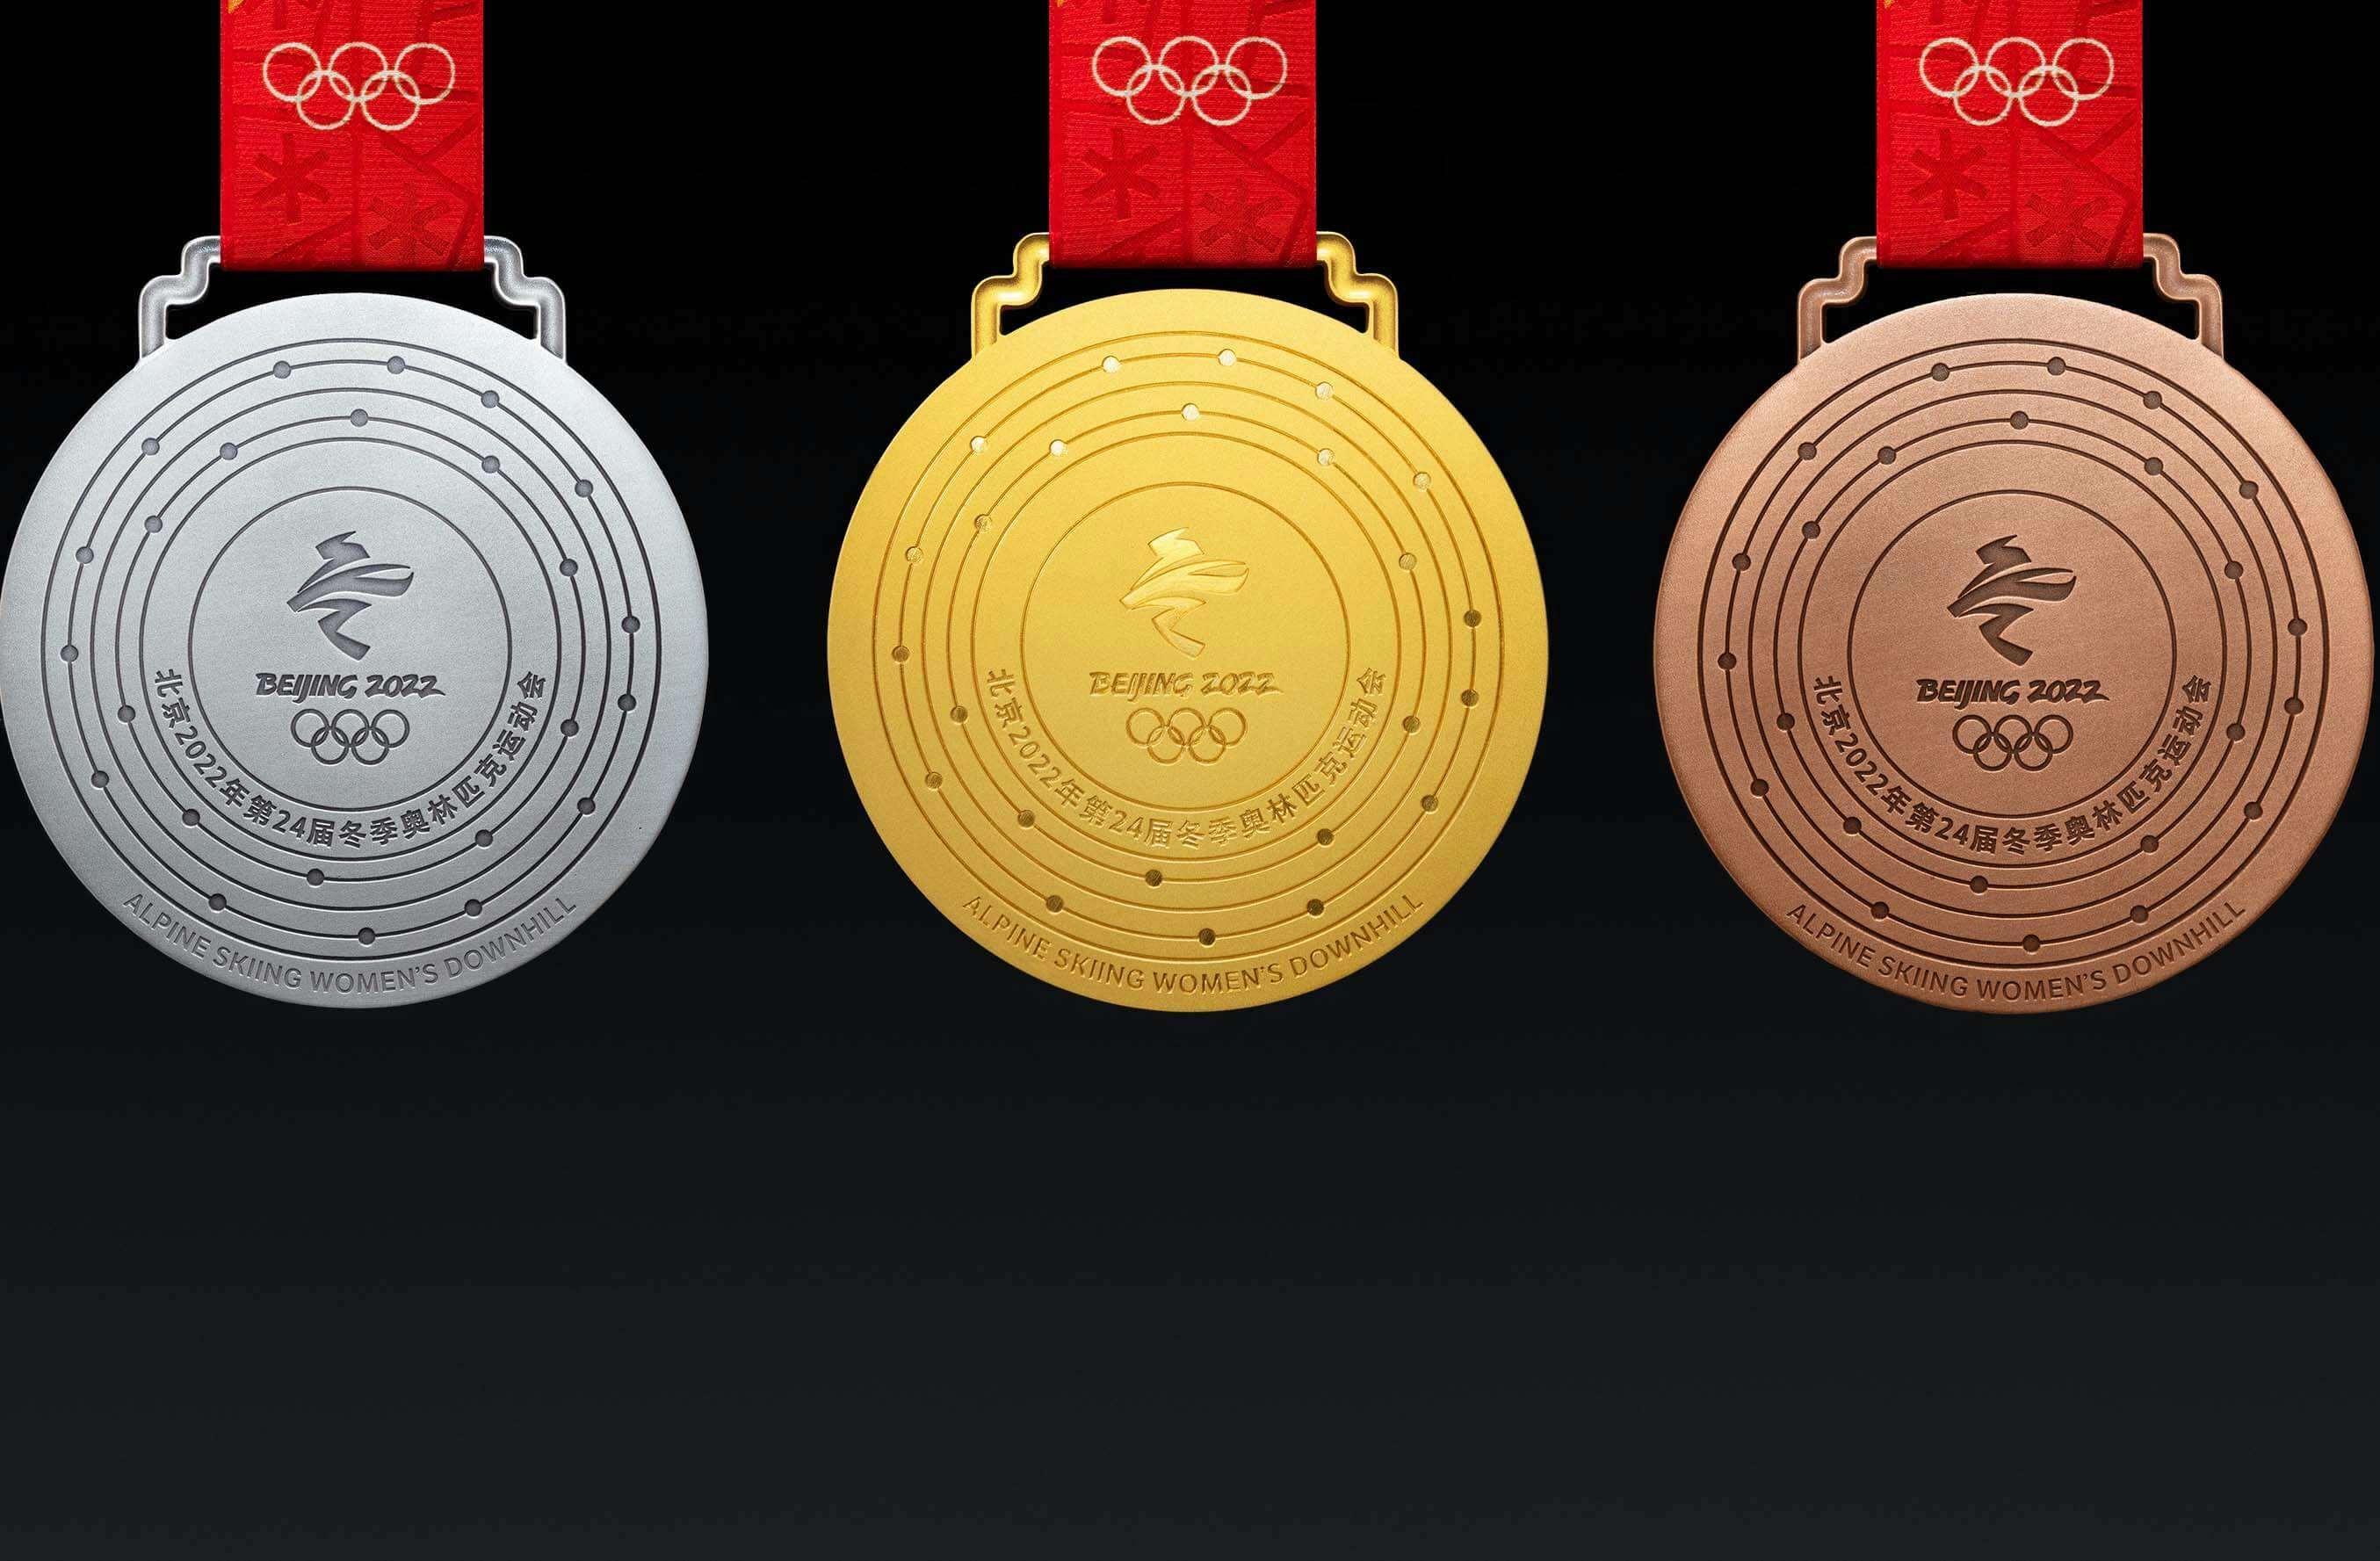 Handout photo released on Oct. 26, 2021 shows the medals of Beijing 2022 Olympic Winter Games. Beijing celebrated the 100-day countdown to the 2022 Olympic Winter Games on Tuesday with the unveiling of the medals for the Games.